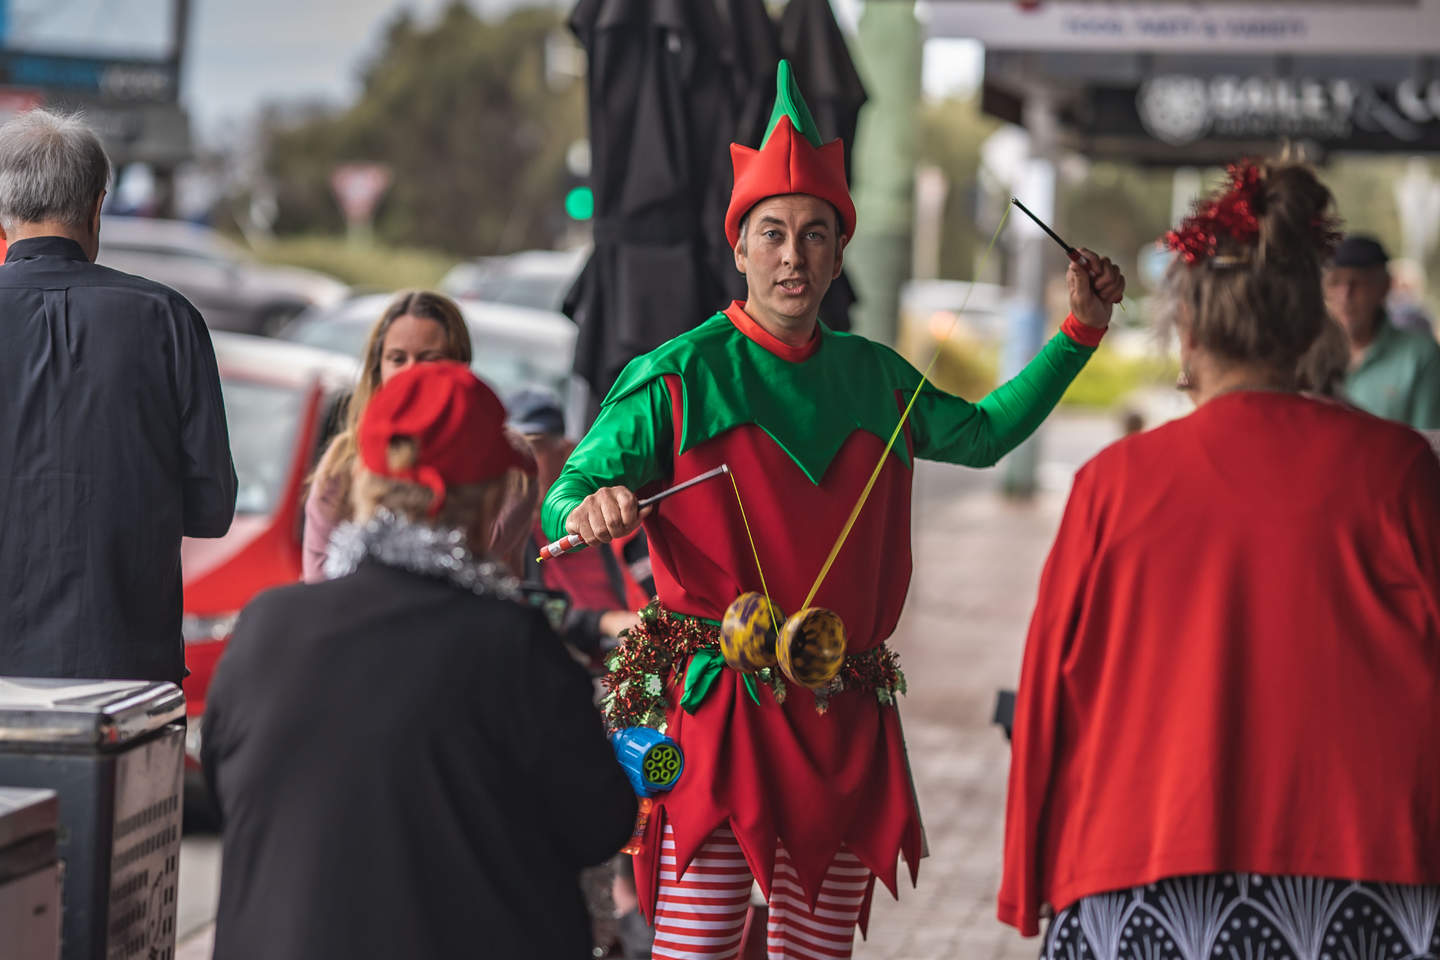 Performing artist dressed as an elf entertaining residents on the street.